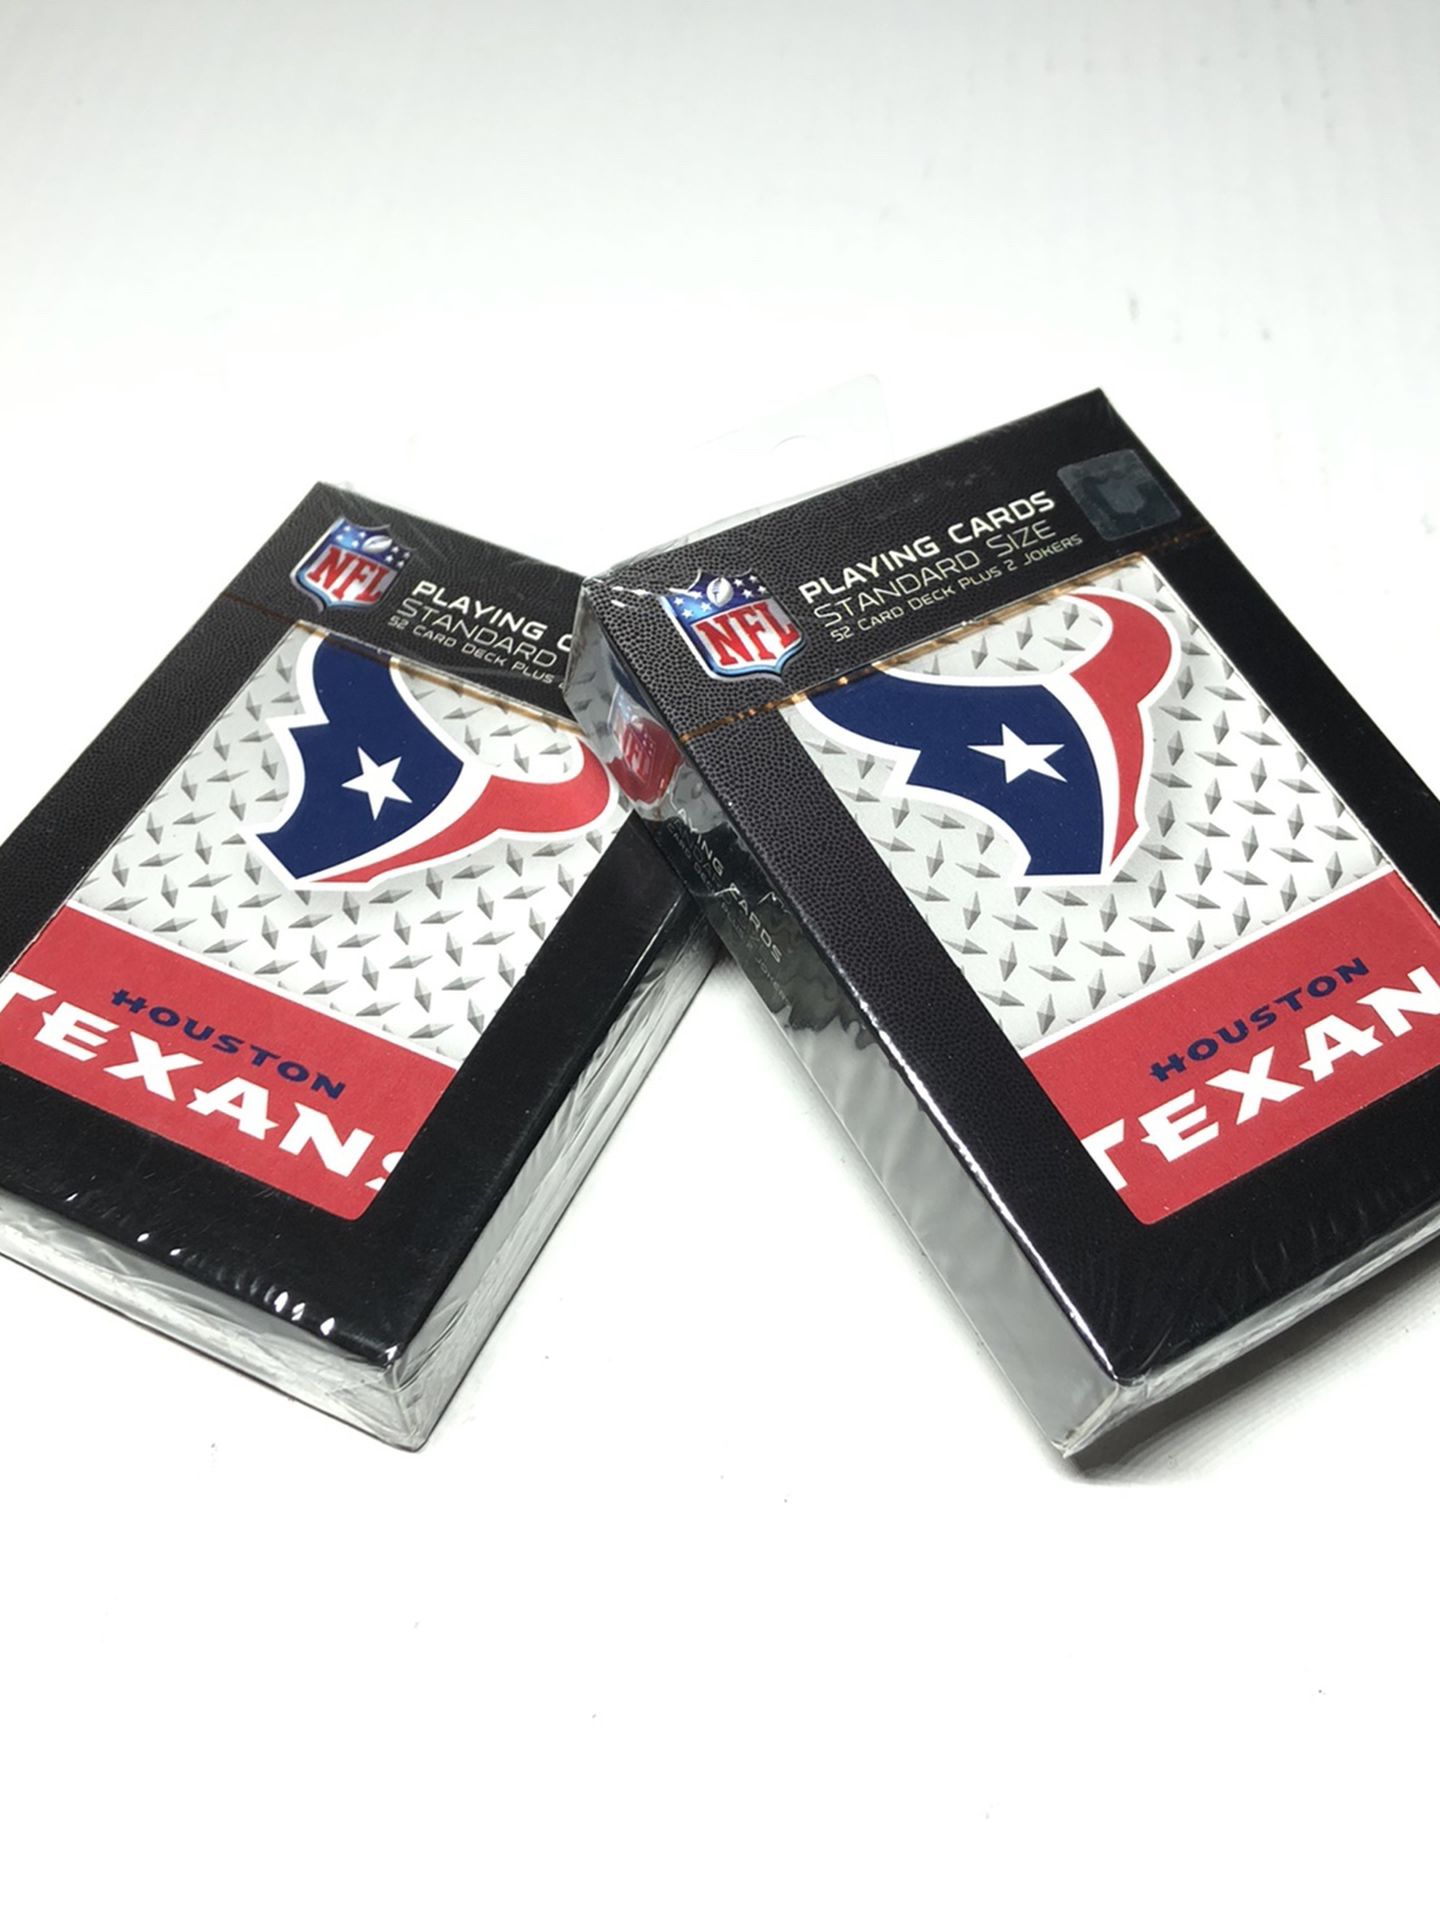 Set of 2x Football Houston Texans Playing Cards Deck Licensed NFL Standard Size